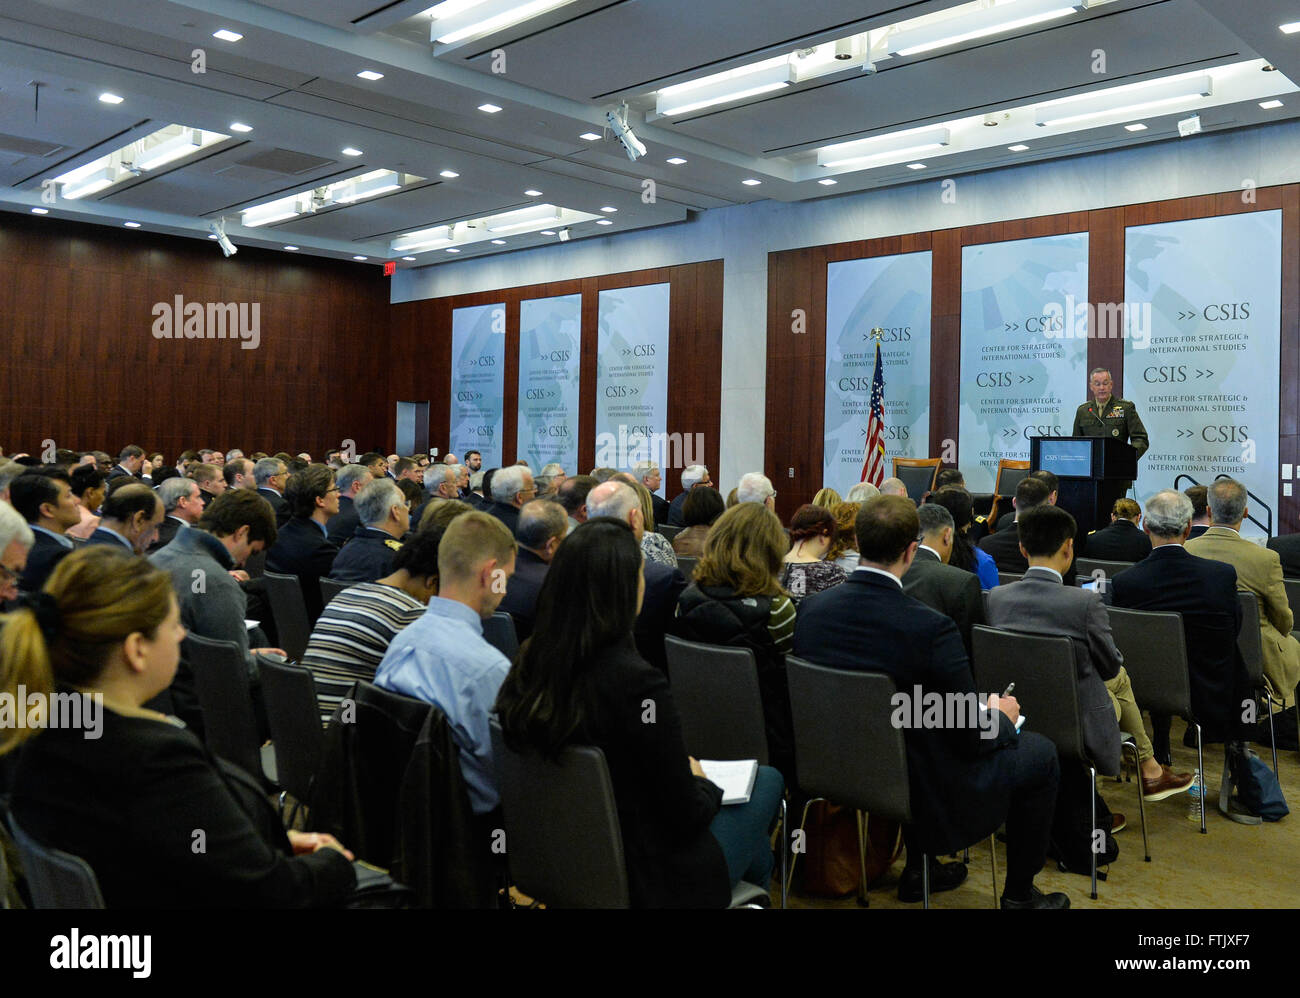 Washington, DC, USA. 29th Mar, 2016. U.S. Joint Chiefs of Staff Chairman Joseph Dunford speaks at the Center for Strategic and International Studies (CSIS) on global security challenges in Washington, DC, capital of the United States, March 29, 2016. © Bao Dandan/Xinhua/Alamy Live News Stock Photo